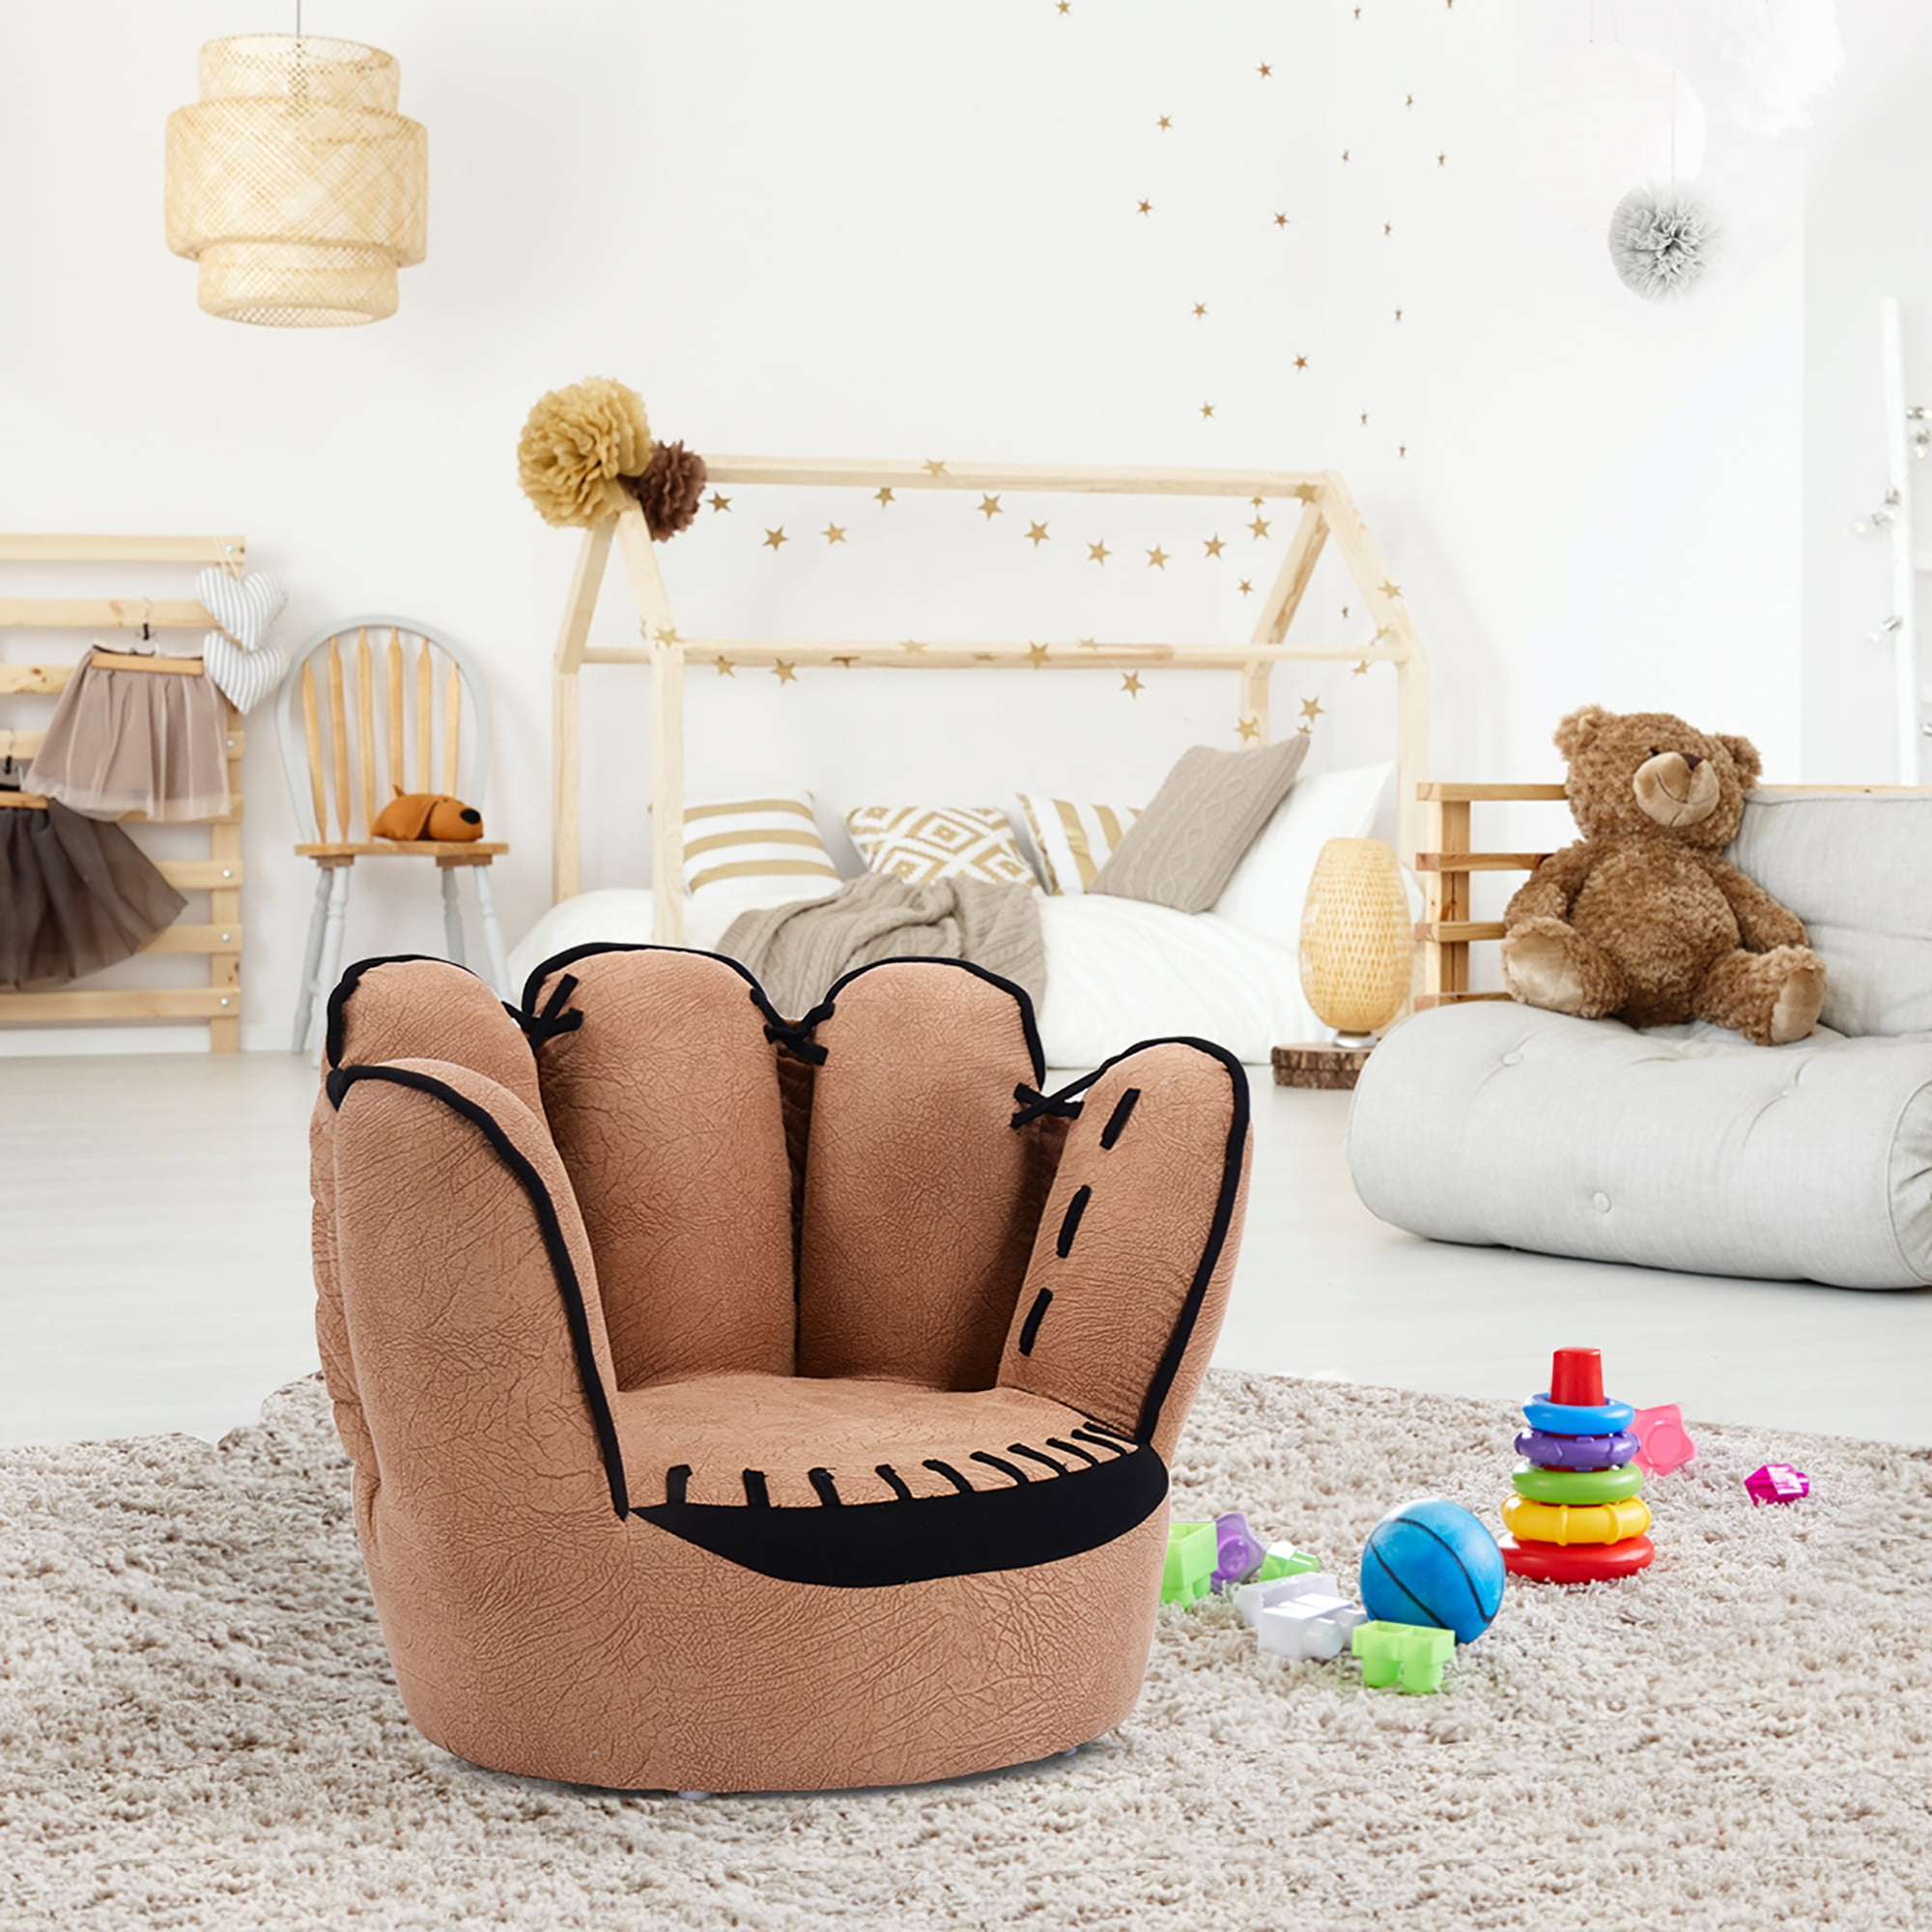 Light Browns Dogs Kids Cartoon Sofas Children Animals Chair Furniture for Boys & Girls Couch for Children Lightweight Children Sofas Chair Bedrooms Decoation